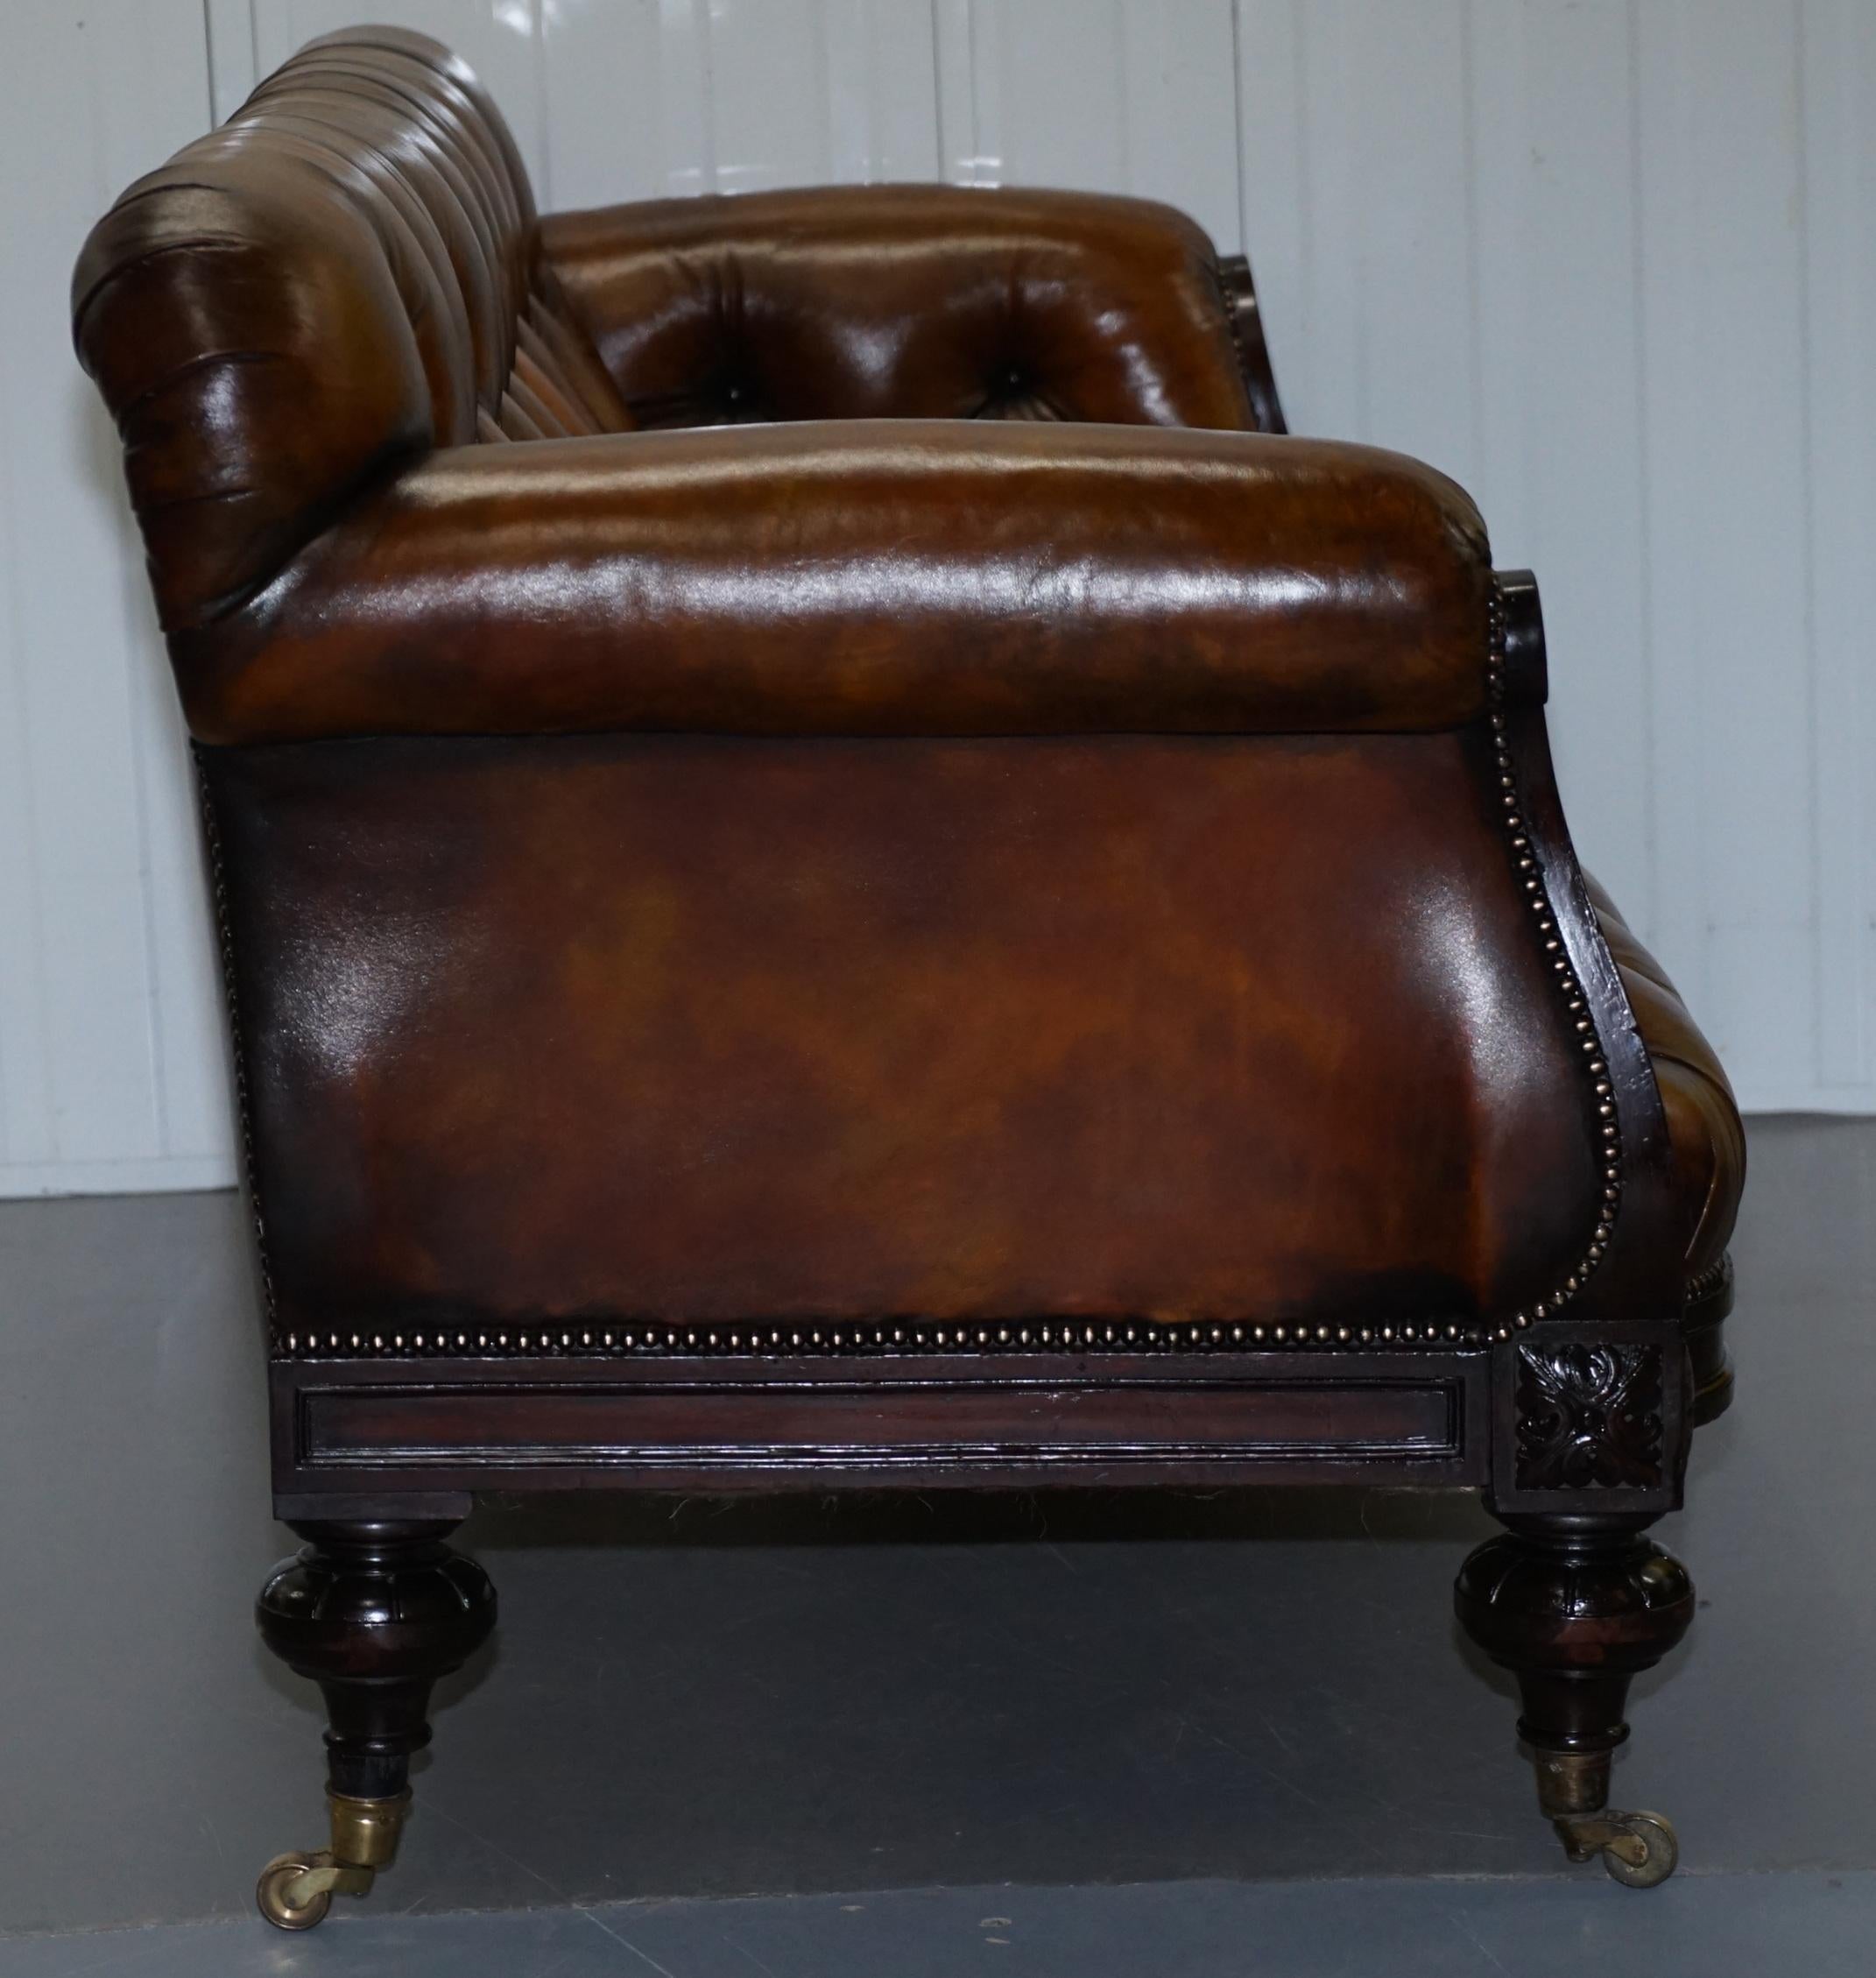 Fully Restored Show Frame Victorian Redwood Chesterfield Brown Leather Sofa 8